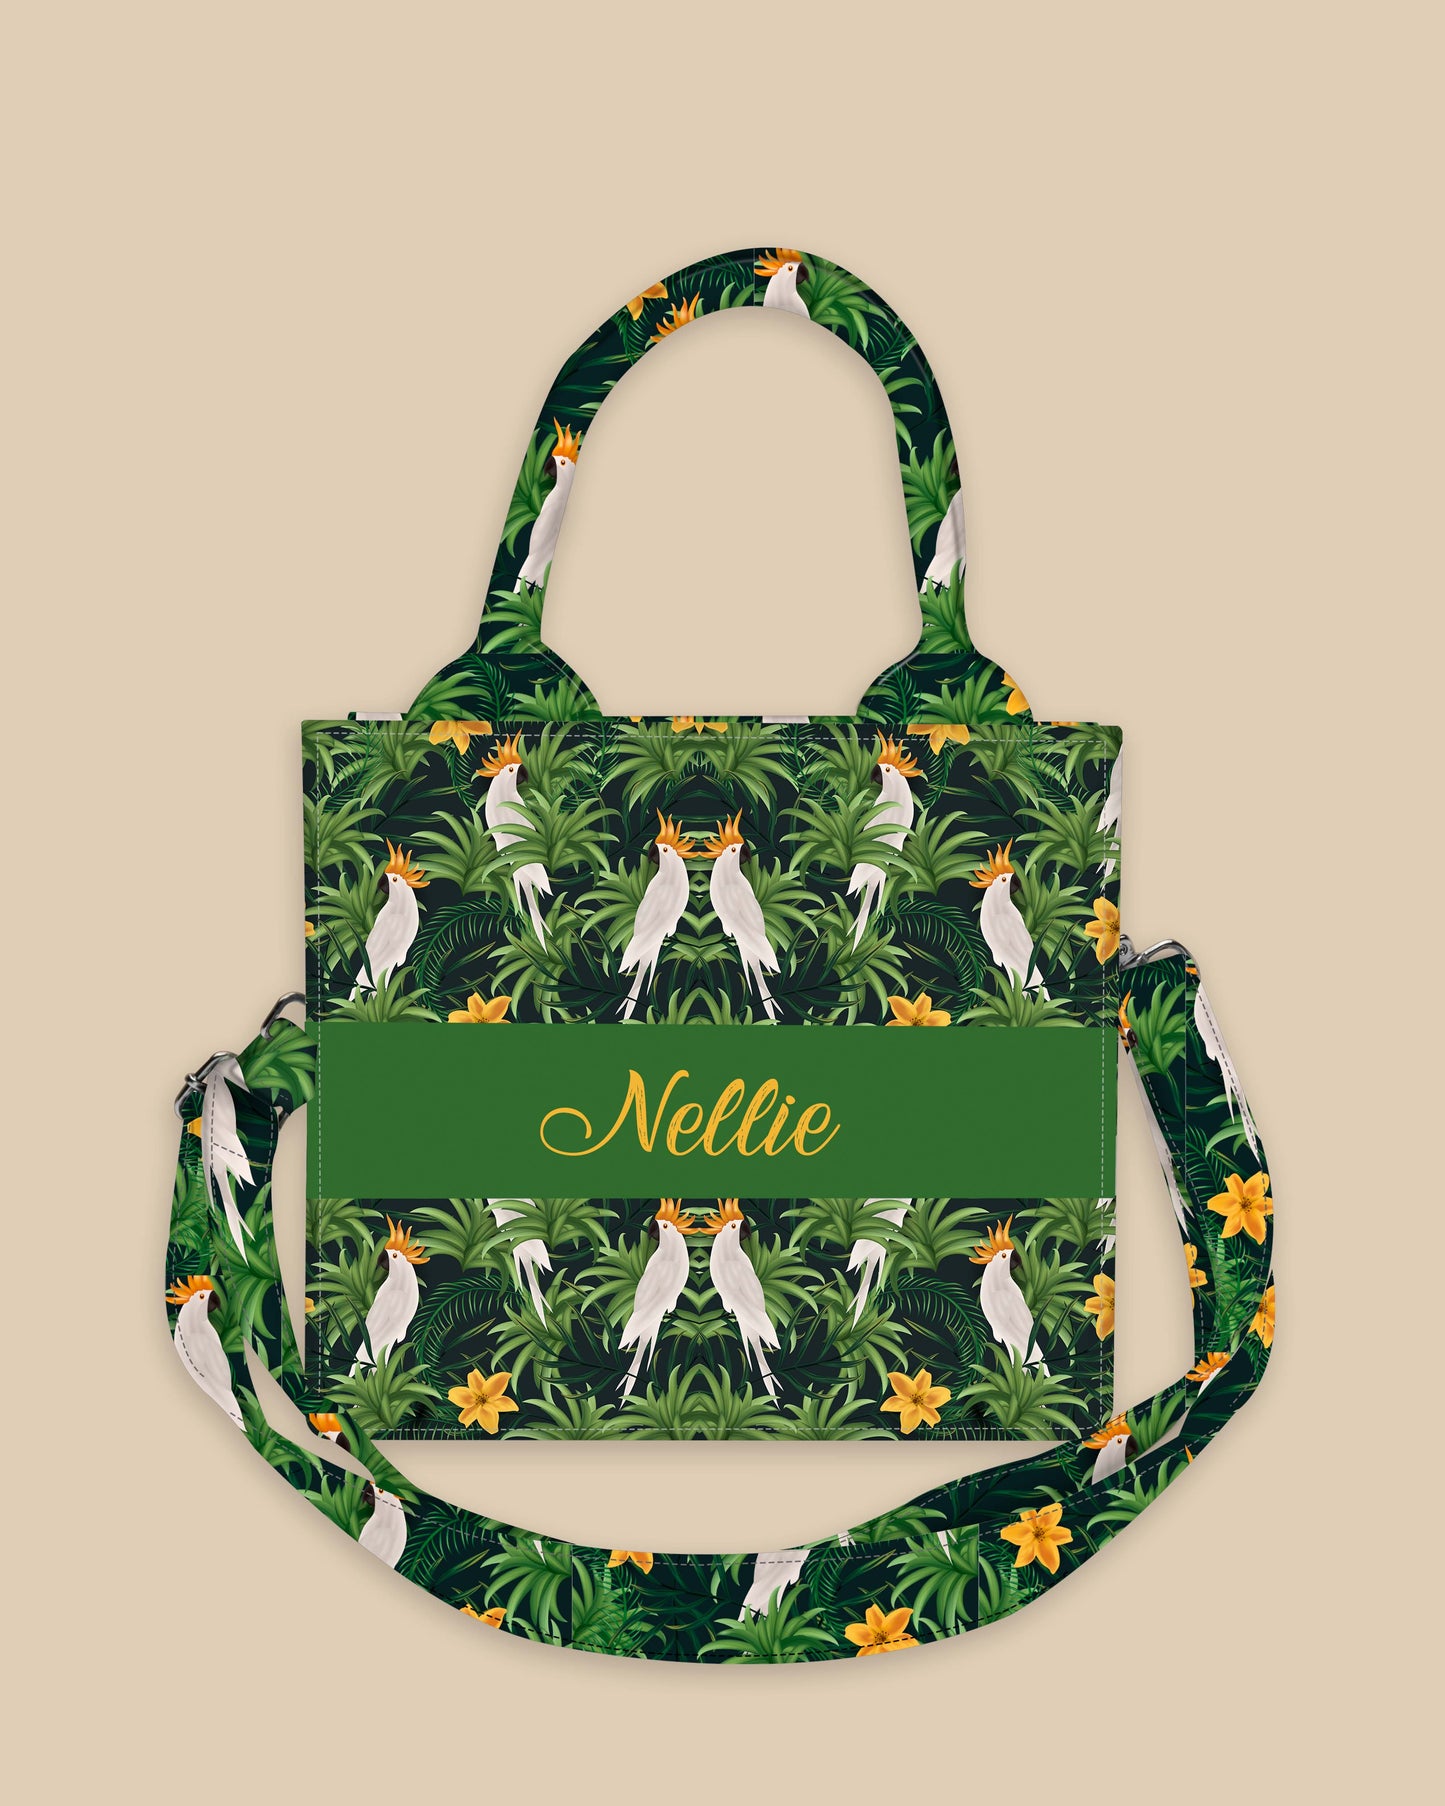 Customized Small Tote Bag Designed With Realistic Tropical Leaves And Cockatoo Bird